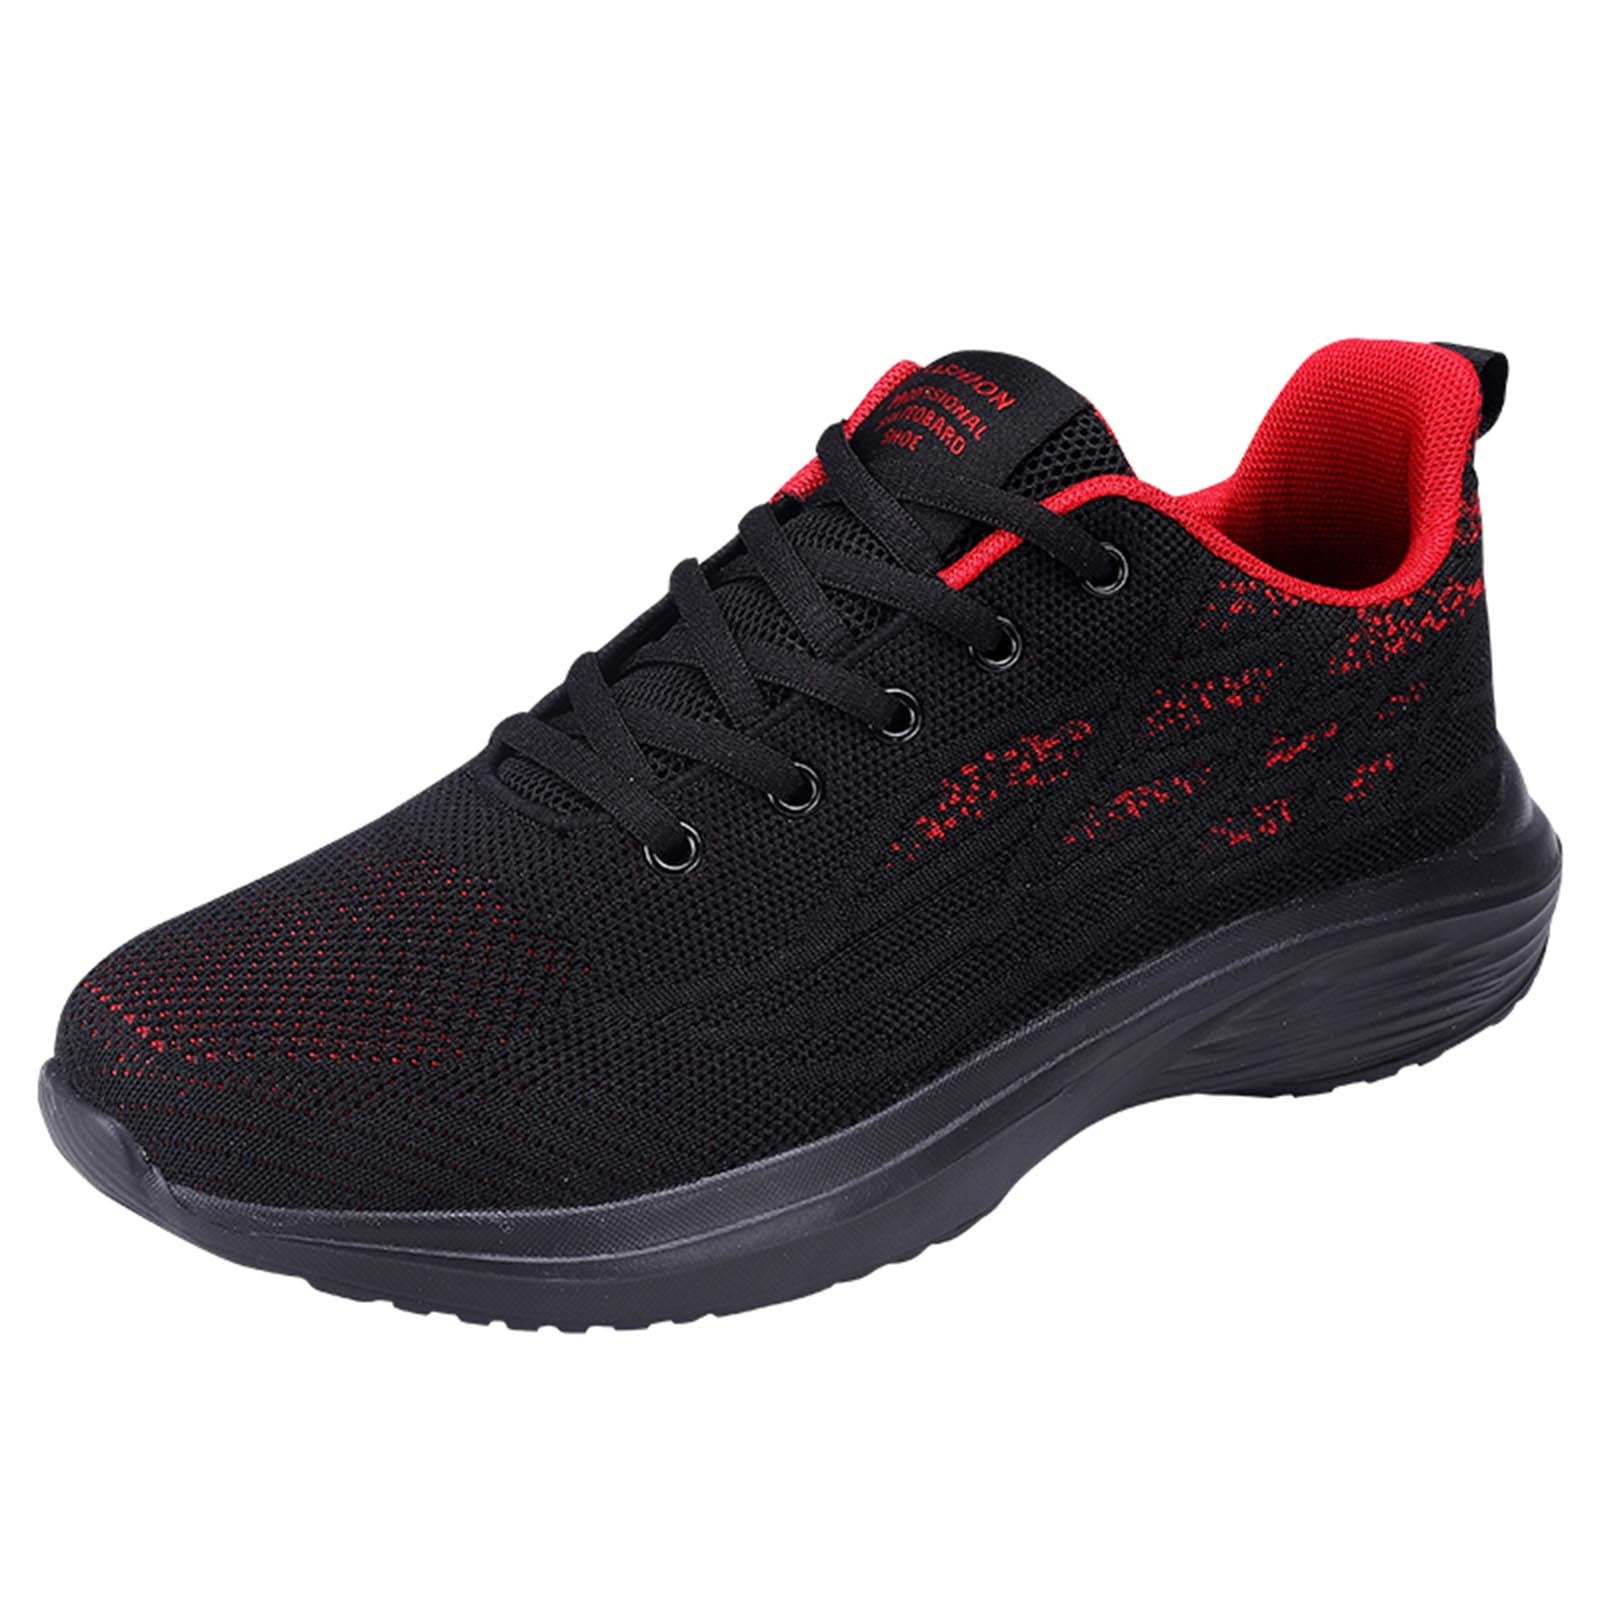 Sports Shoes For Men | Walking | Running | GYM | Training | Athletic